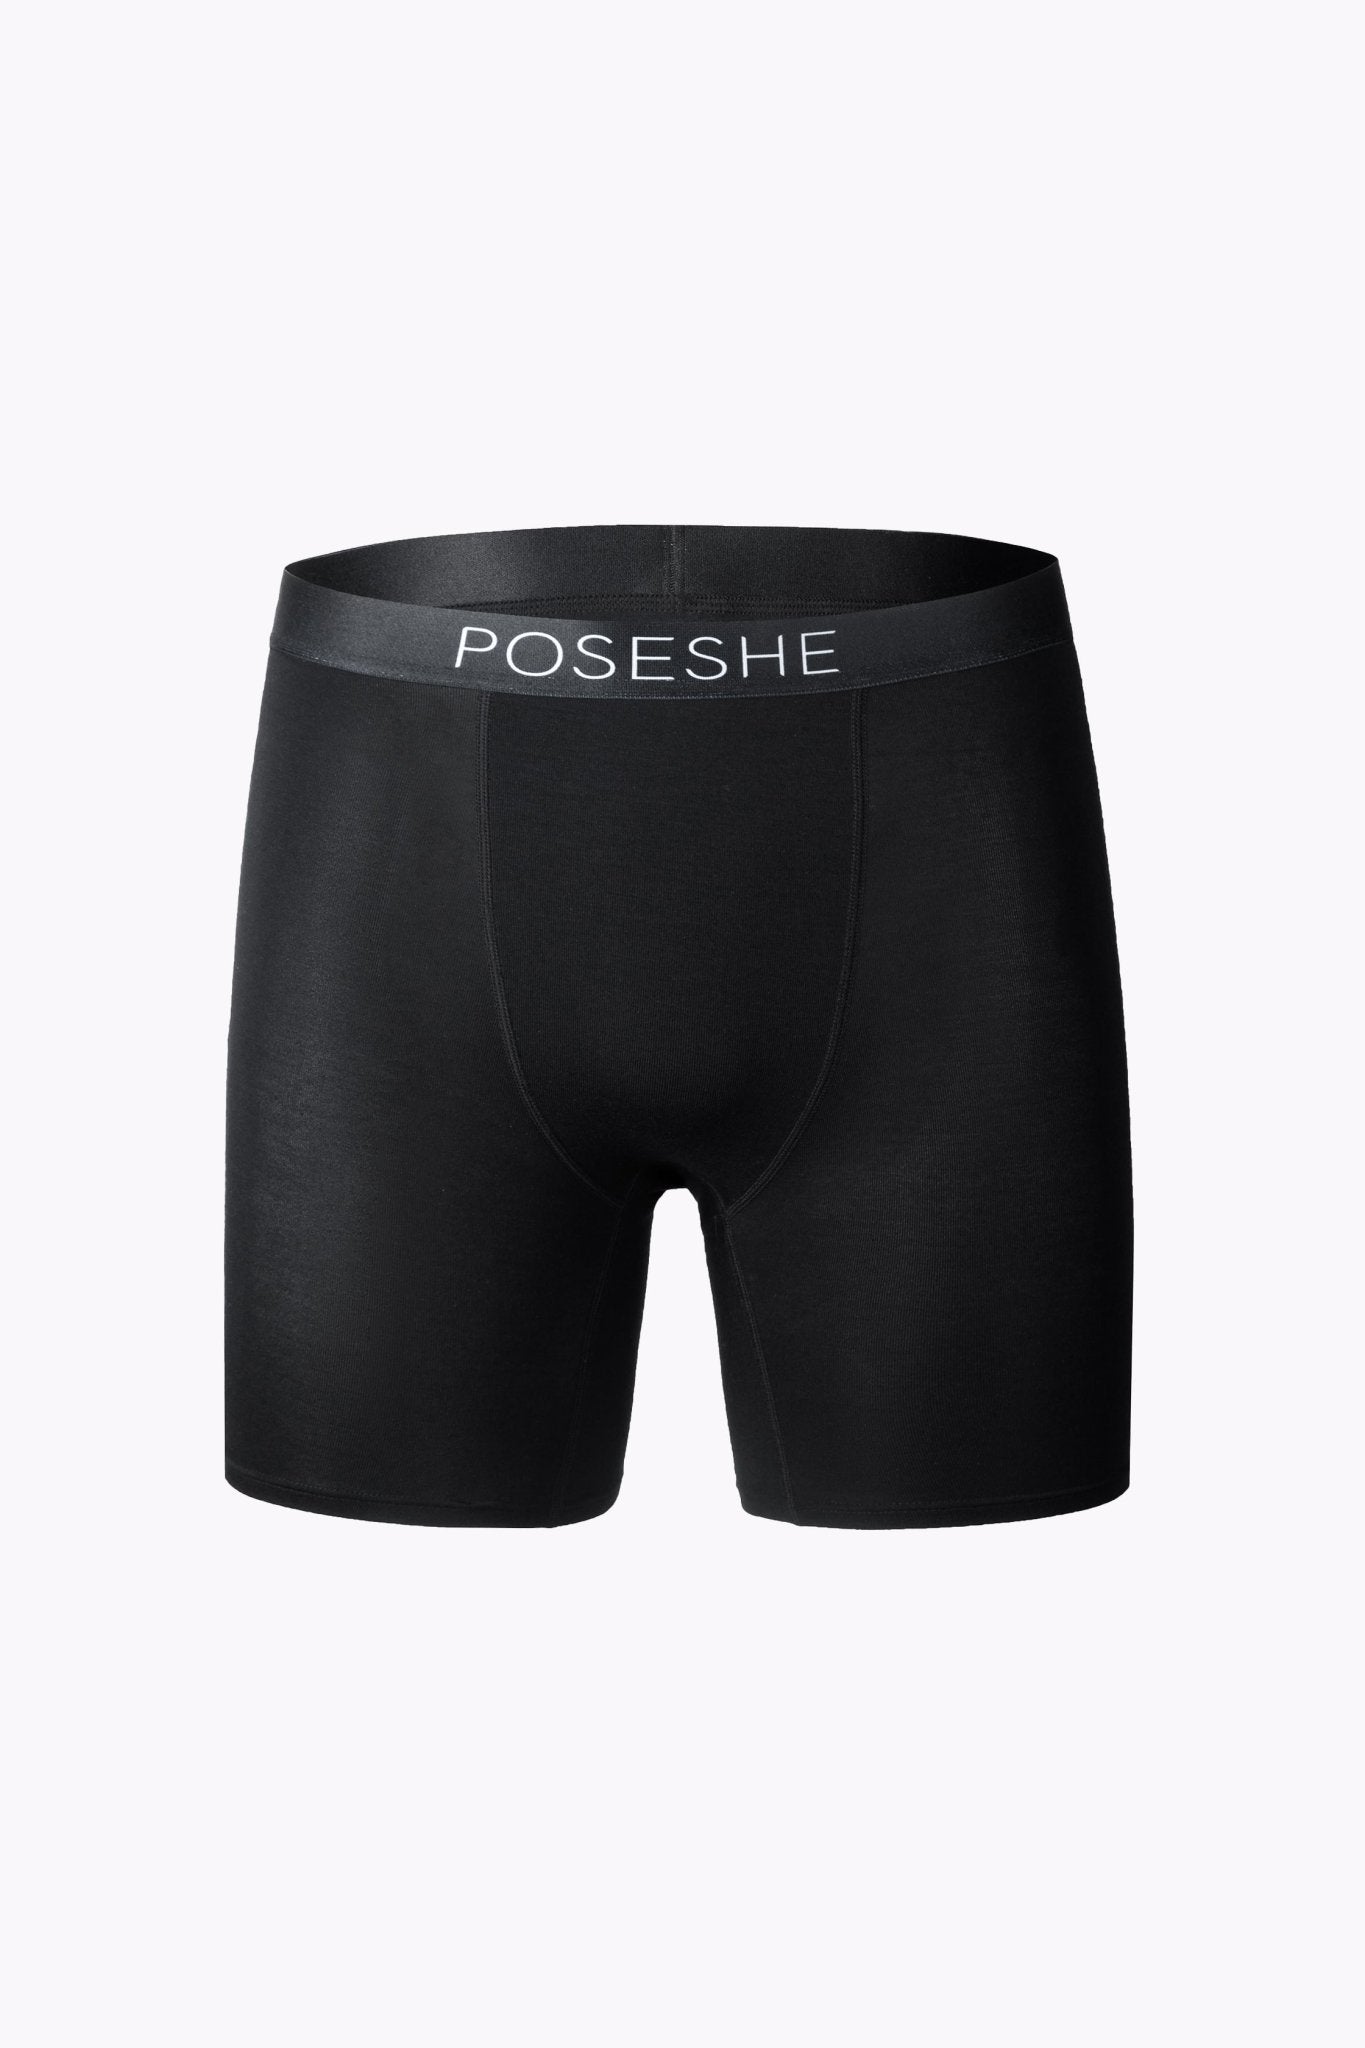 Body Liberator High-Waisted Boxer Briefs (Period Friendly) - POSESHE